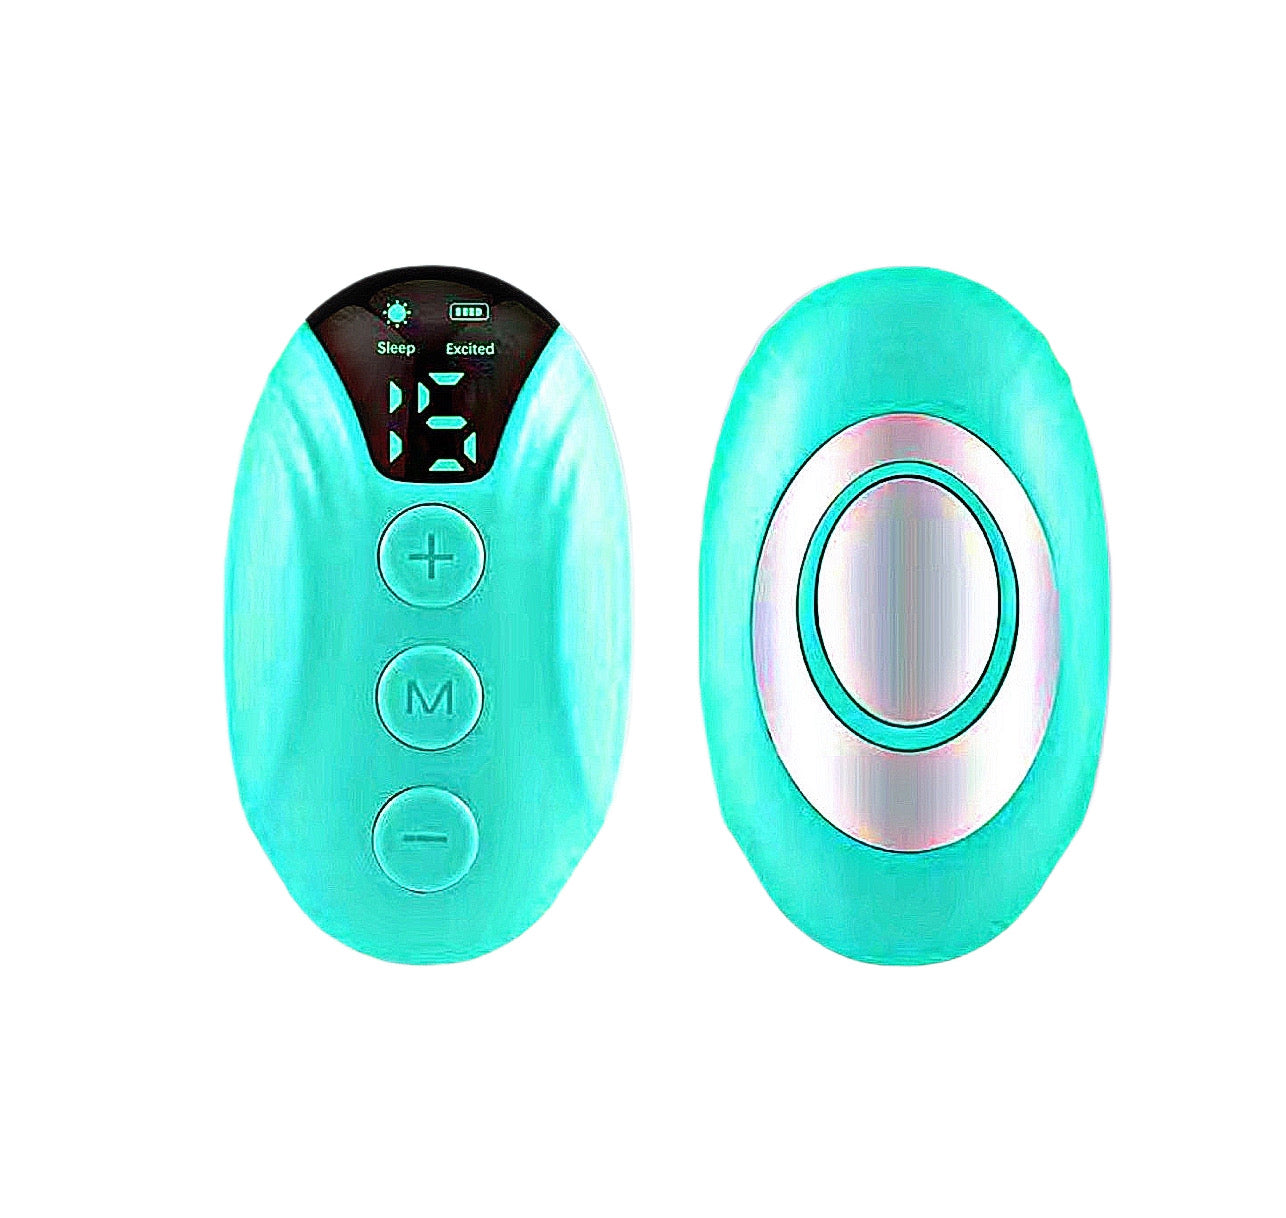 Adult Woman's Calming Kit With New Fitness Tracker